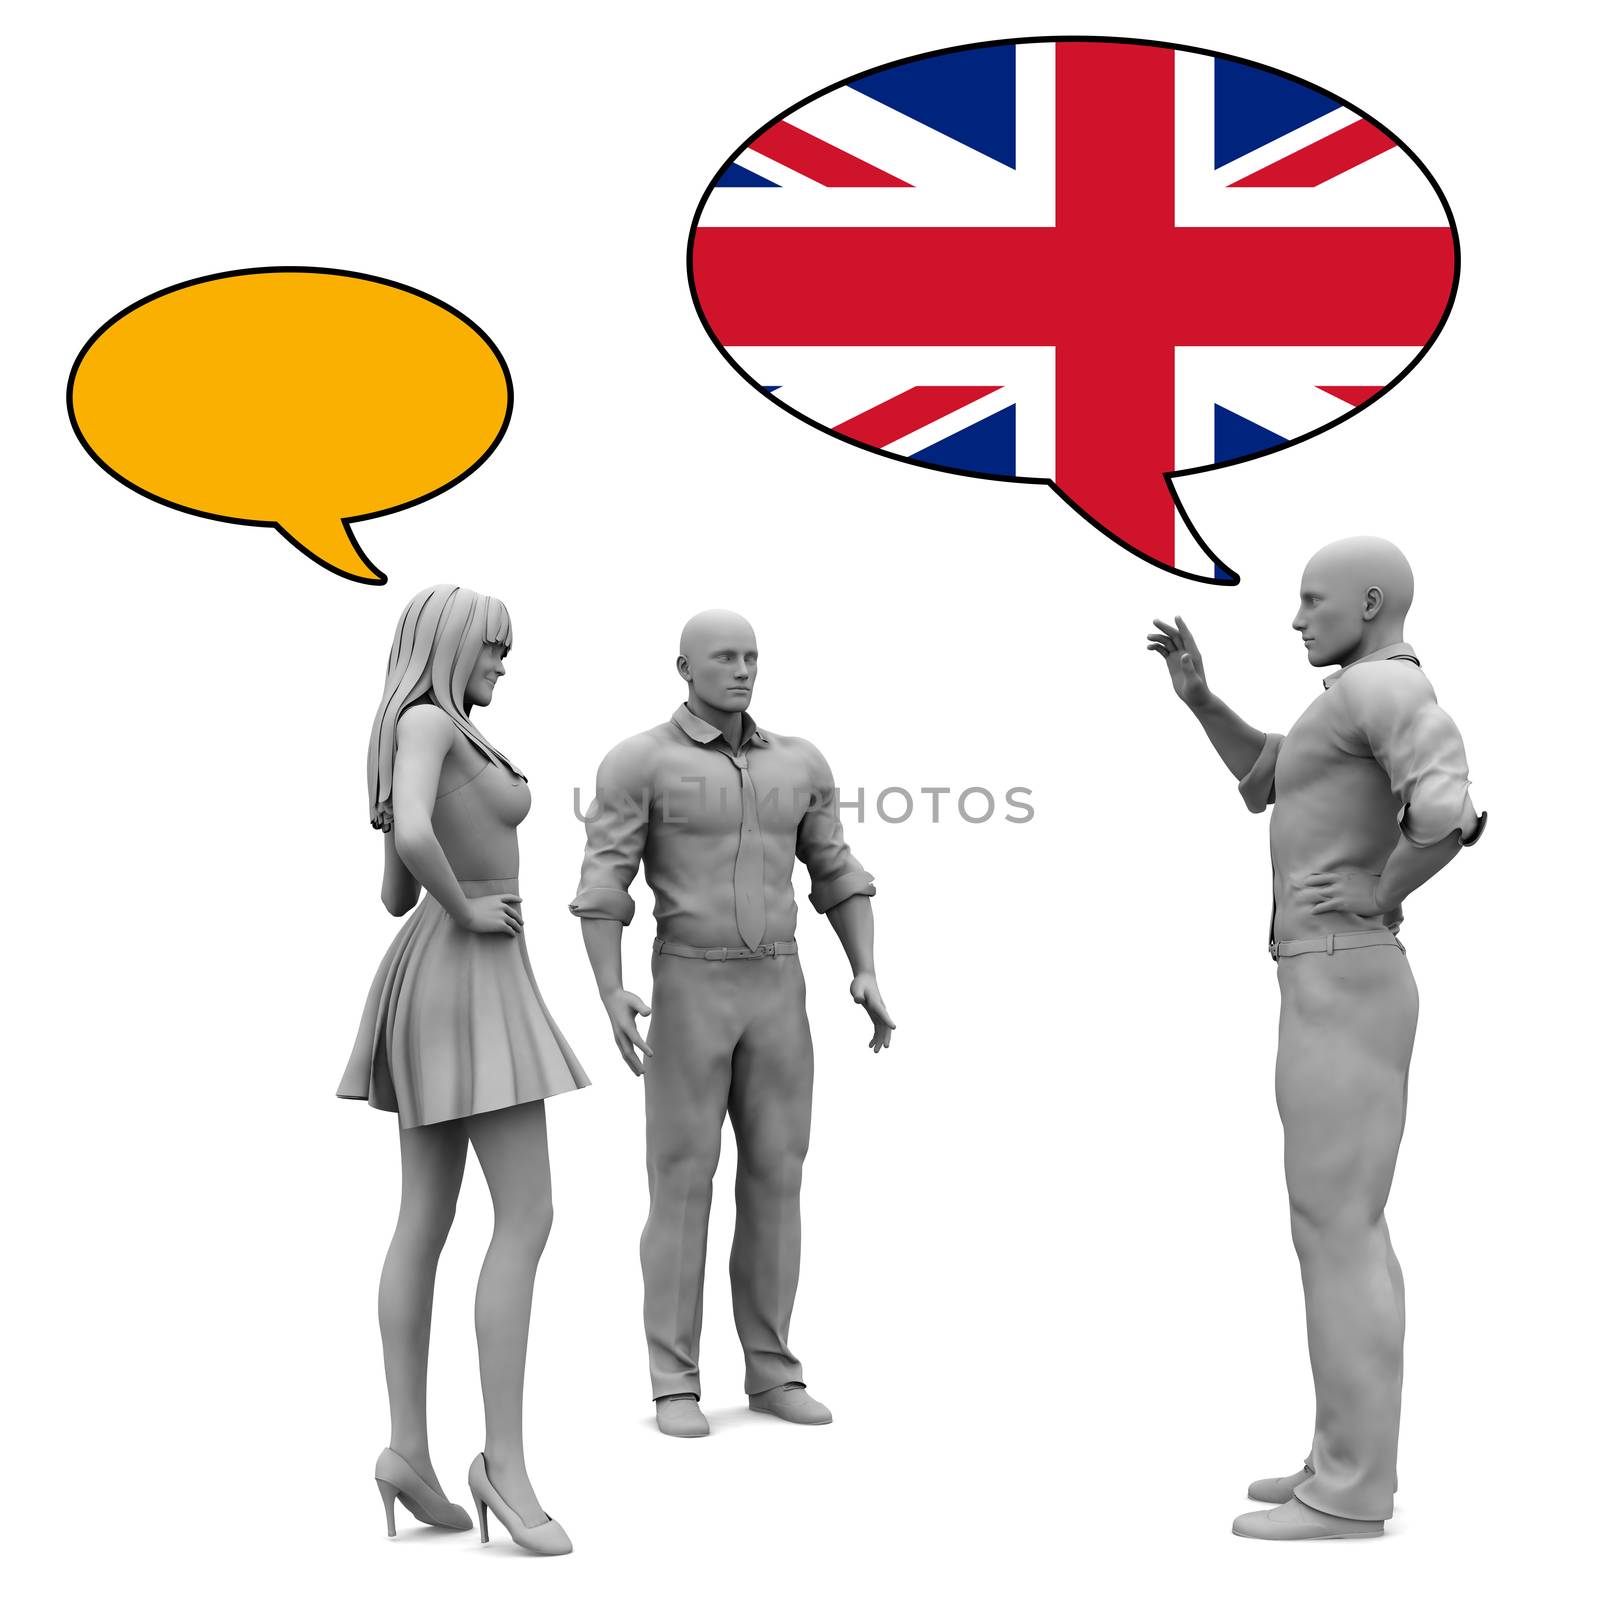 Learn English Culture and Language to Communicate